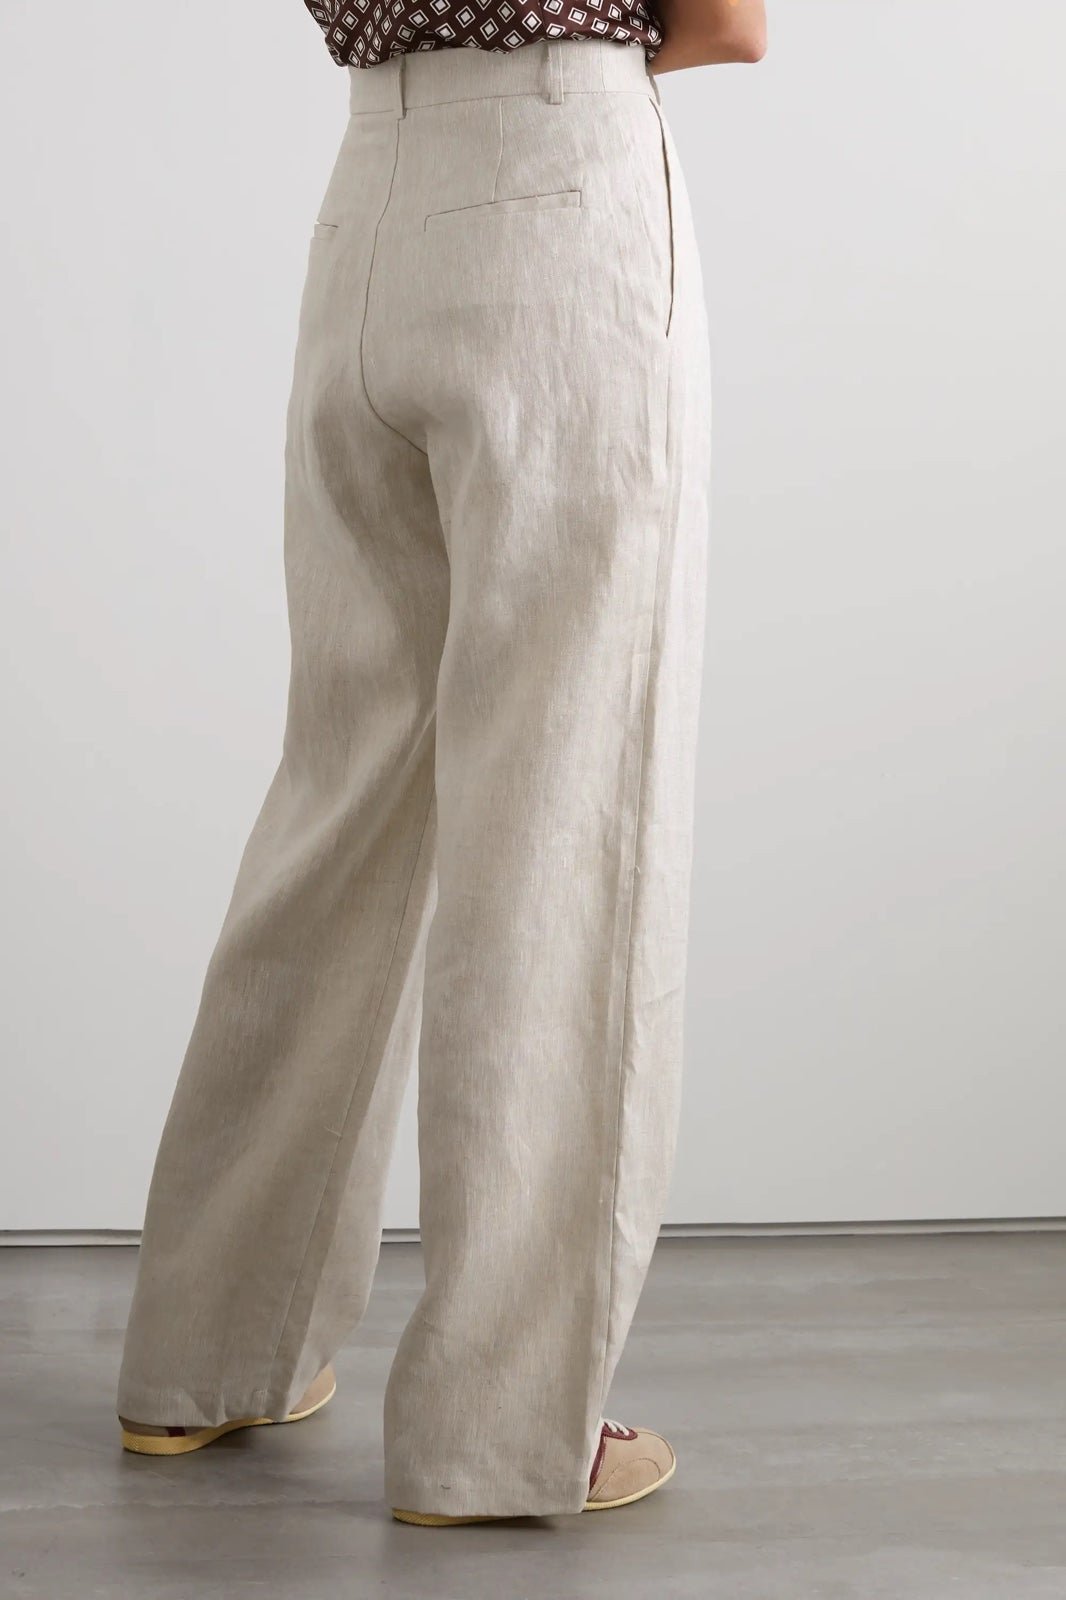 Authentic Reformation Genevieve Cropped Linen Pants 8 hZzW86oEH Counter Genuine 